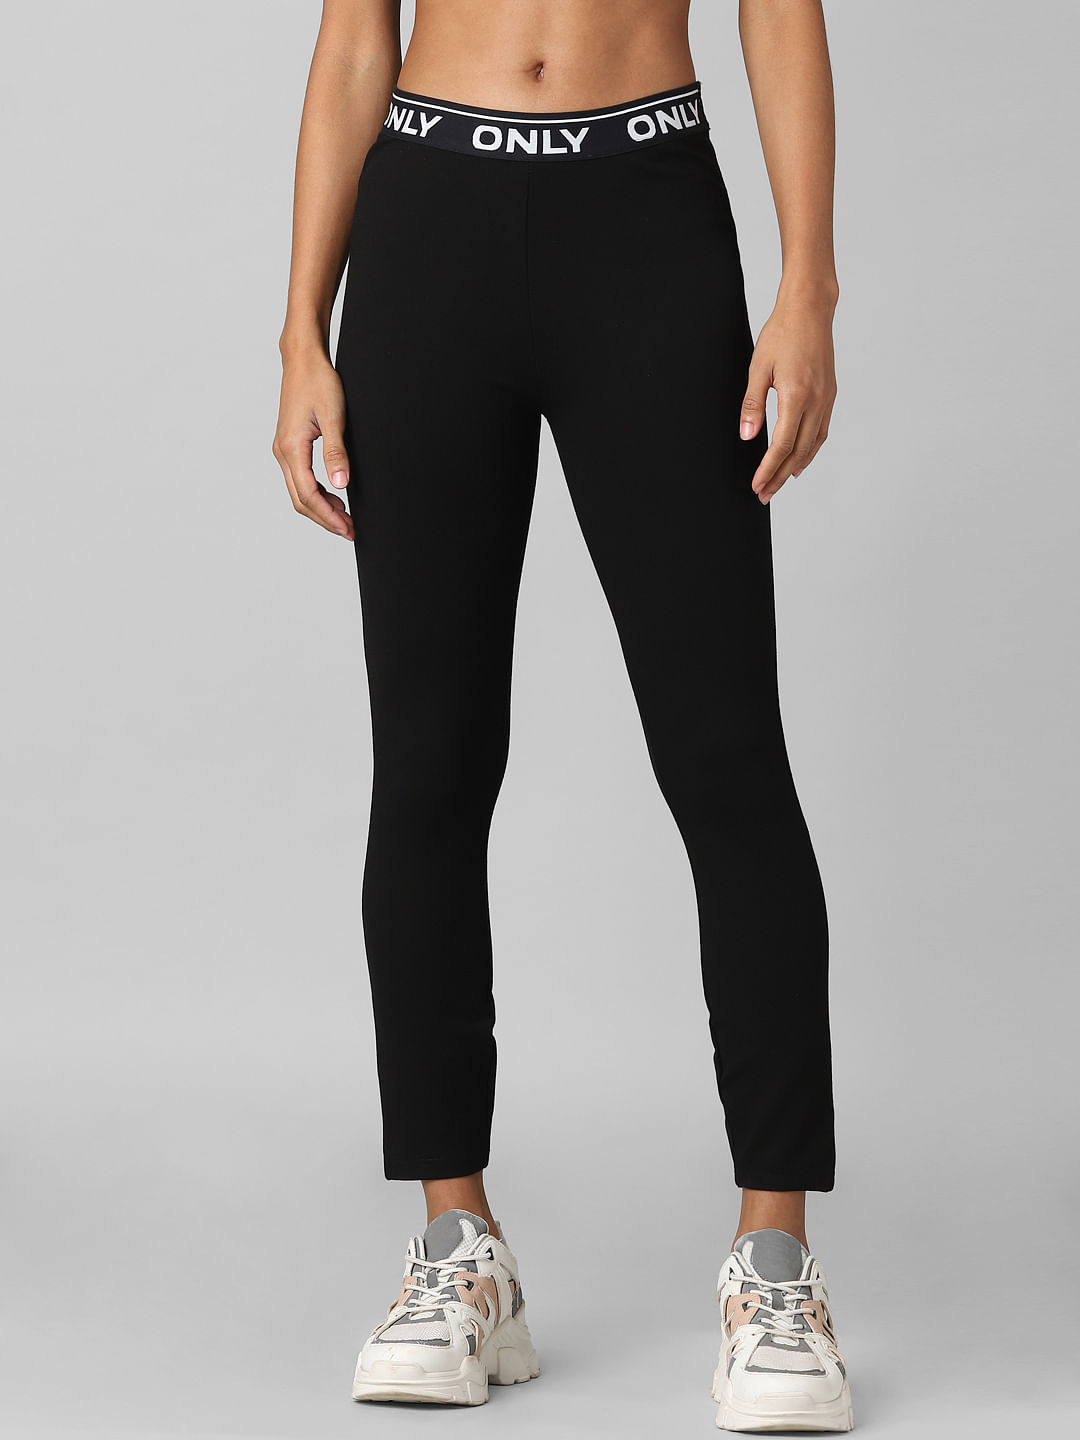 High Waisted Leggings - Spotted - confiDANCE wear